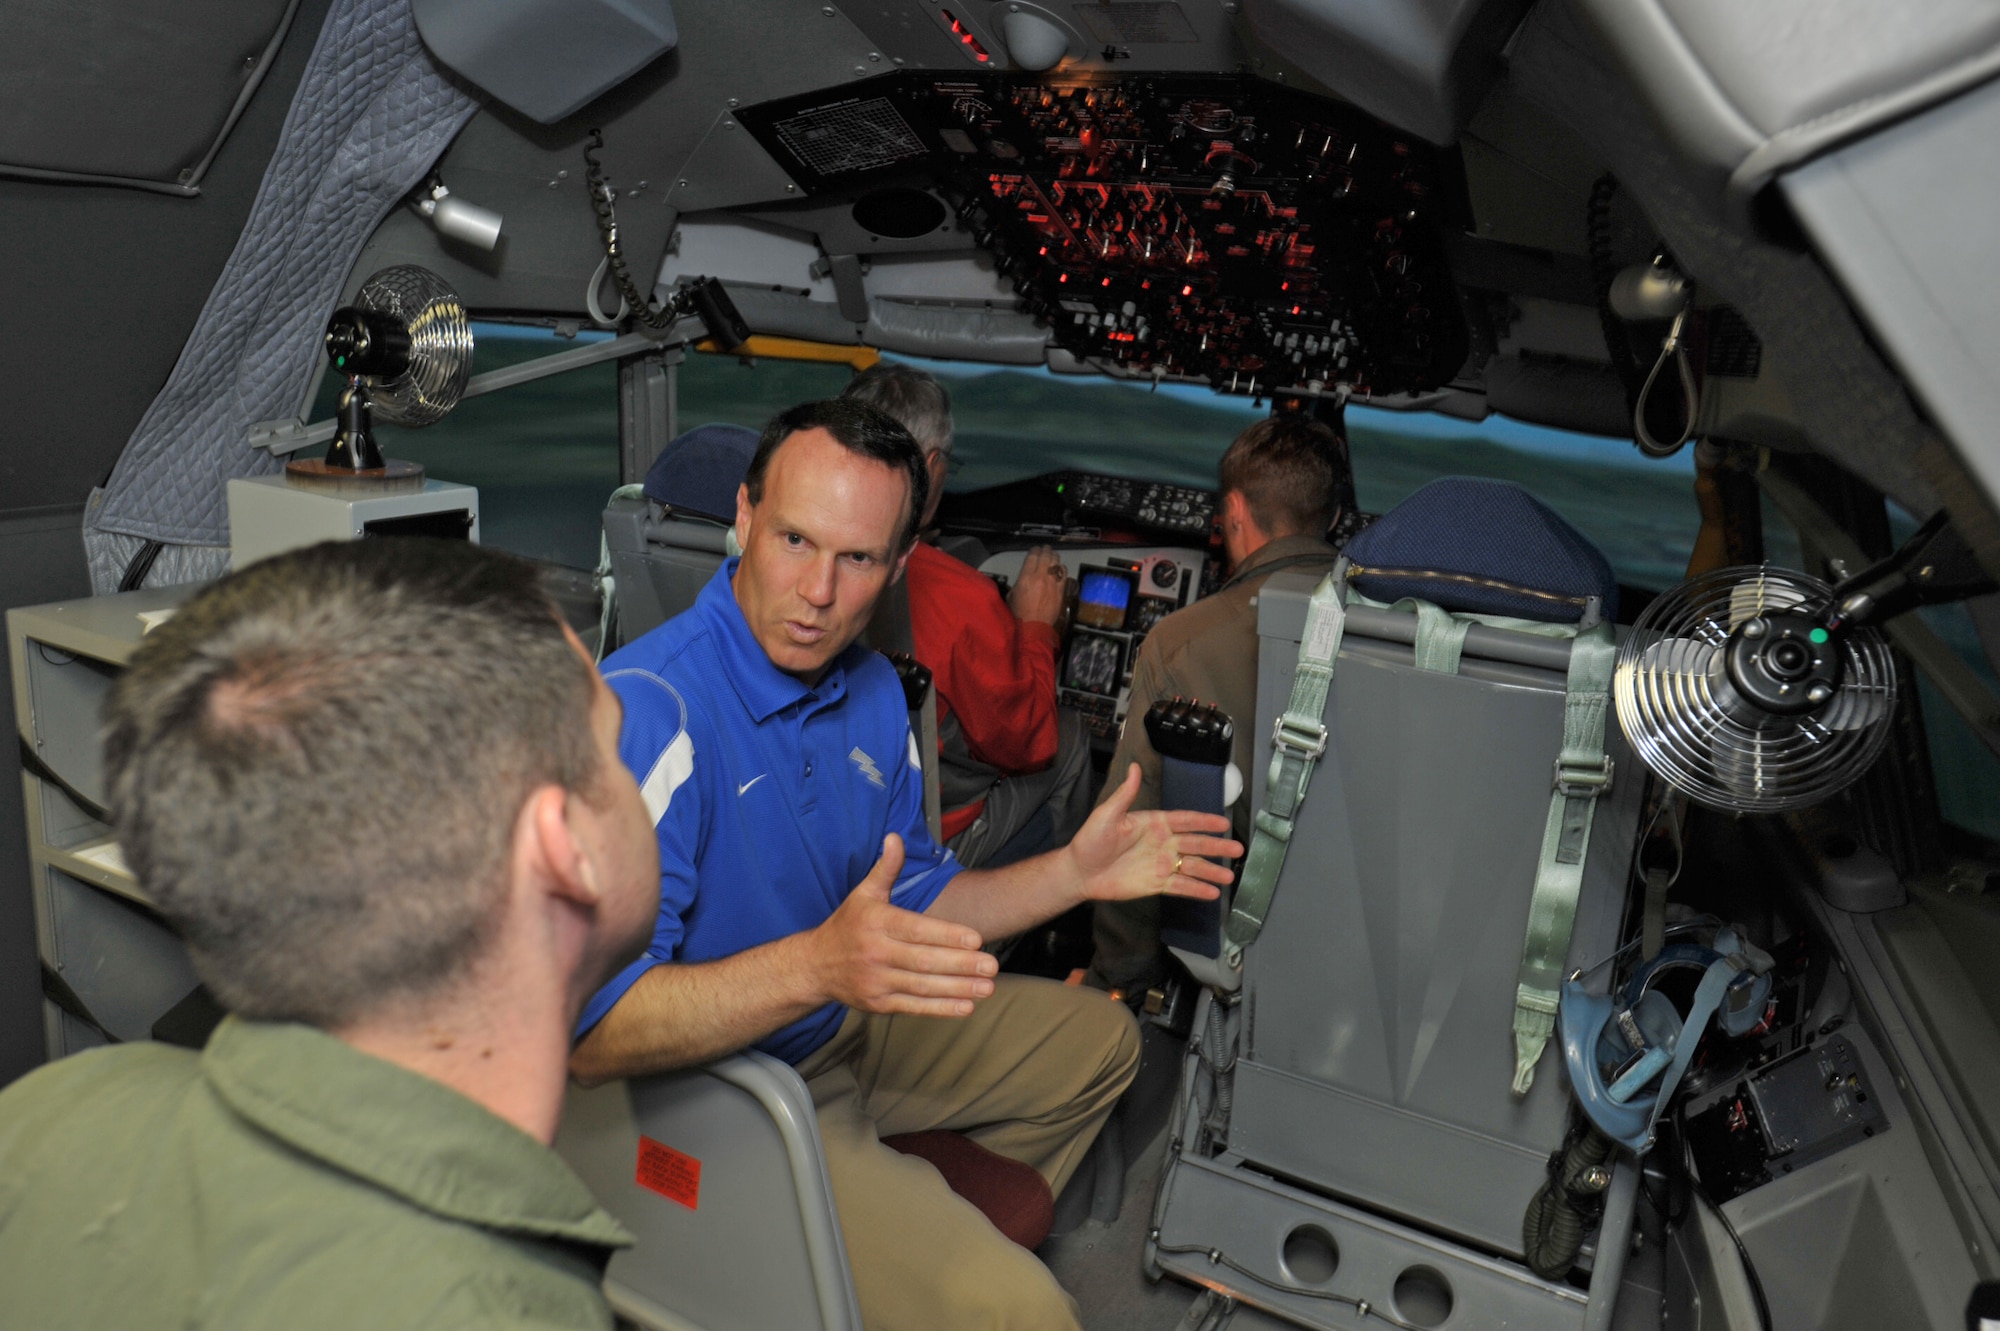 Troy Calhoun, head football coach at the Air Force Academy, talks to a KC-135 Stratotanker pilot while Jim Tressel, head football coach at Ohio State University, learns how to fly inside a KC-135 simulator at McConnell Air Force Base, Kan., on May 27. The coaches were visiting the base at the start of Coaches Tour 2009, a morale-boosting mission that allows icons of college football to interact with U.S. servicemembers. (U.S. Air Force photo/Tech. Sgt. Jason Schaap)